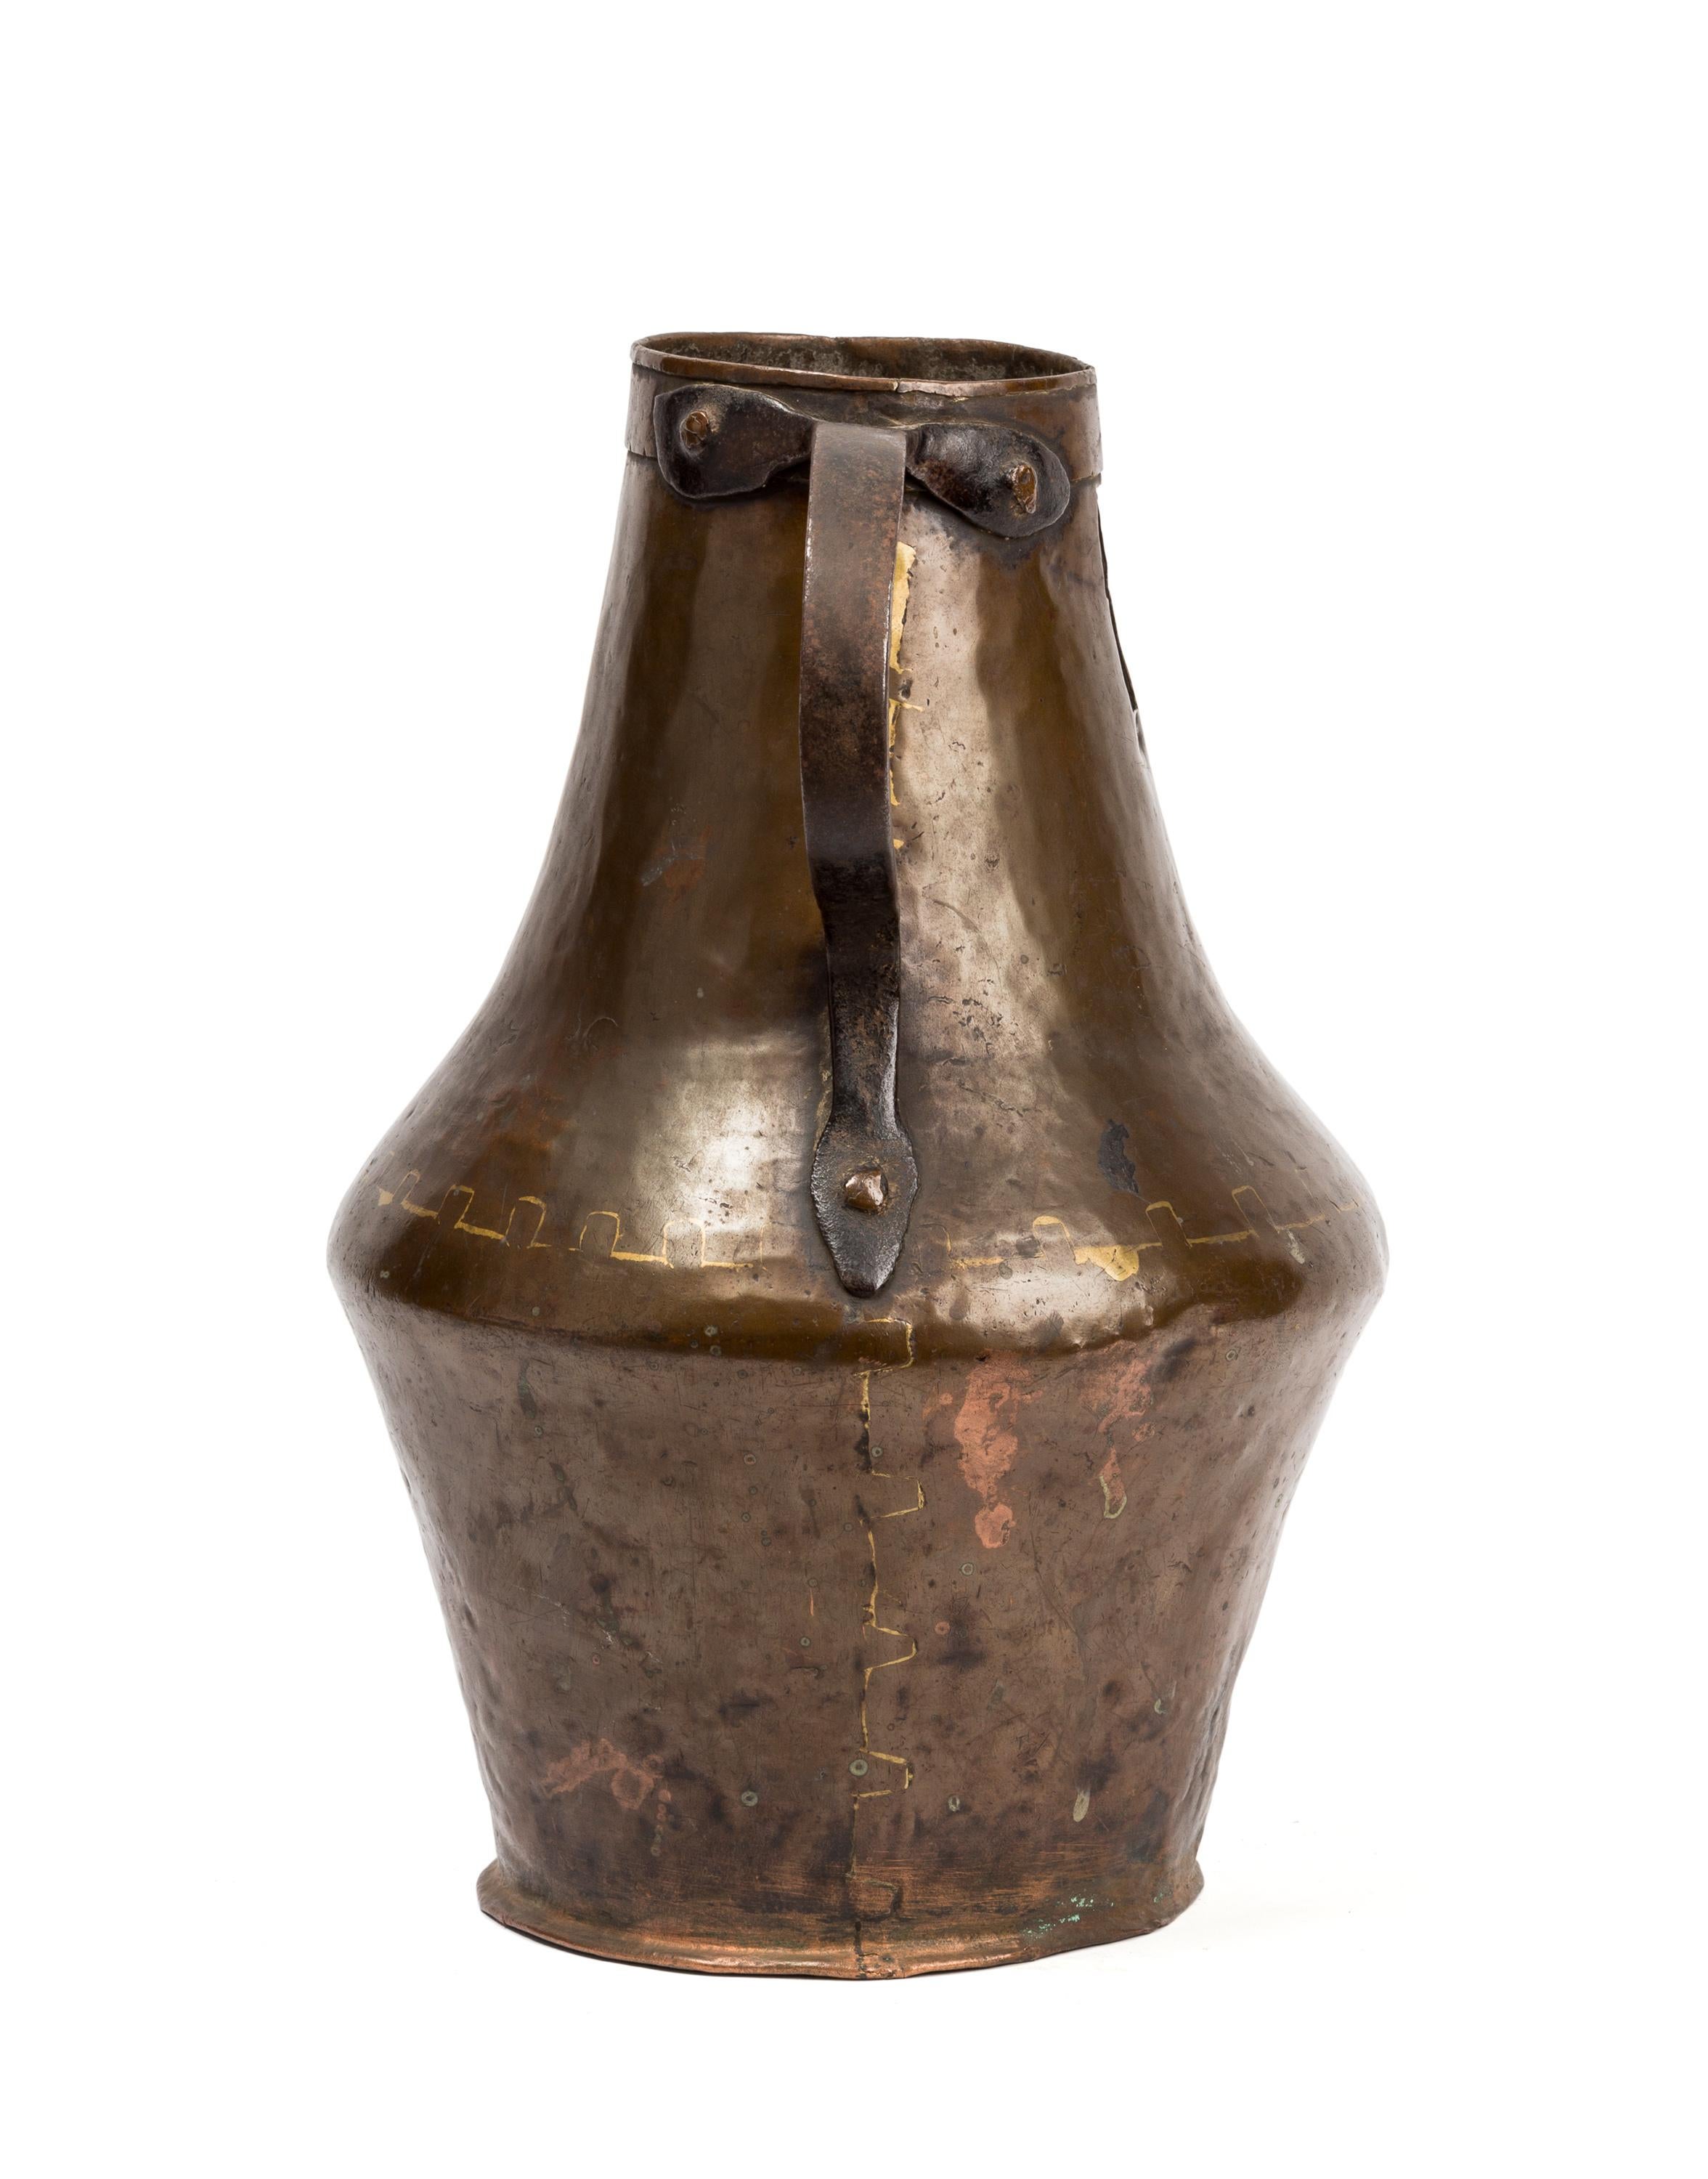 Hammered, riveted and soldered in 18th century Spain, this copper container was made for common household use, but with its sculptural form, rich color and patina of age it surpasses its rough beginnings to become a thing of beauty. The pitcher sits